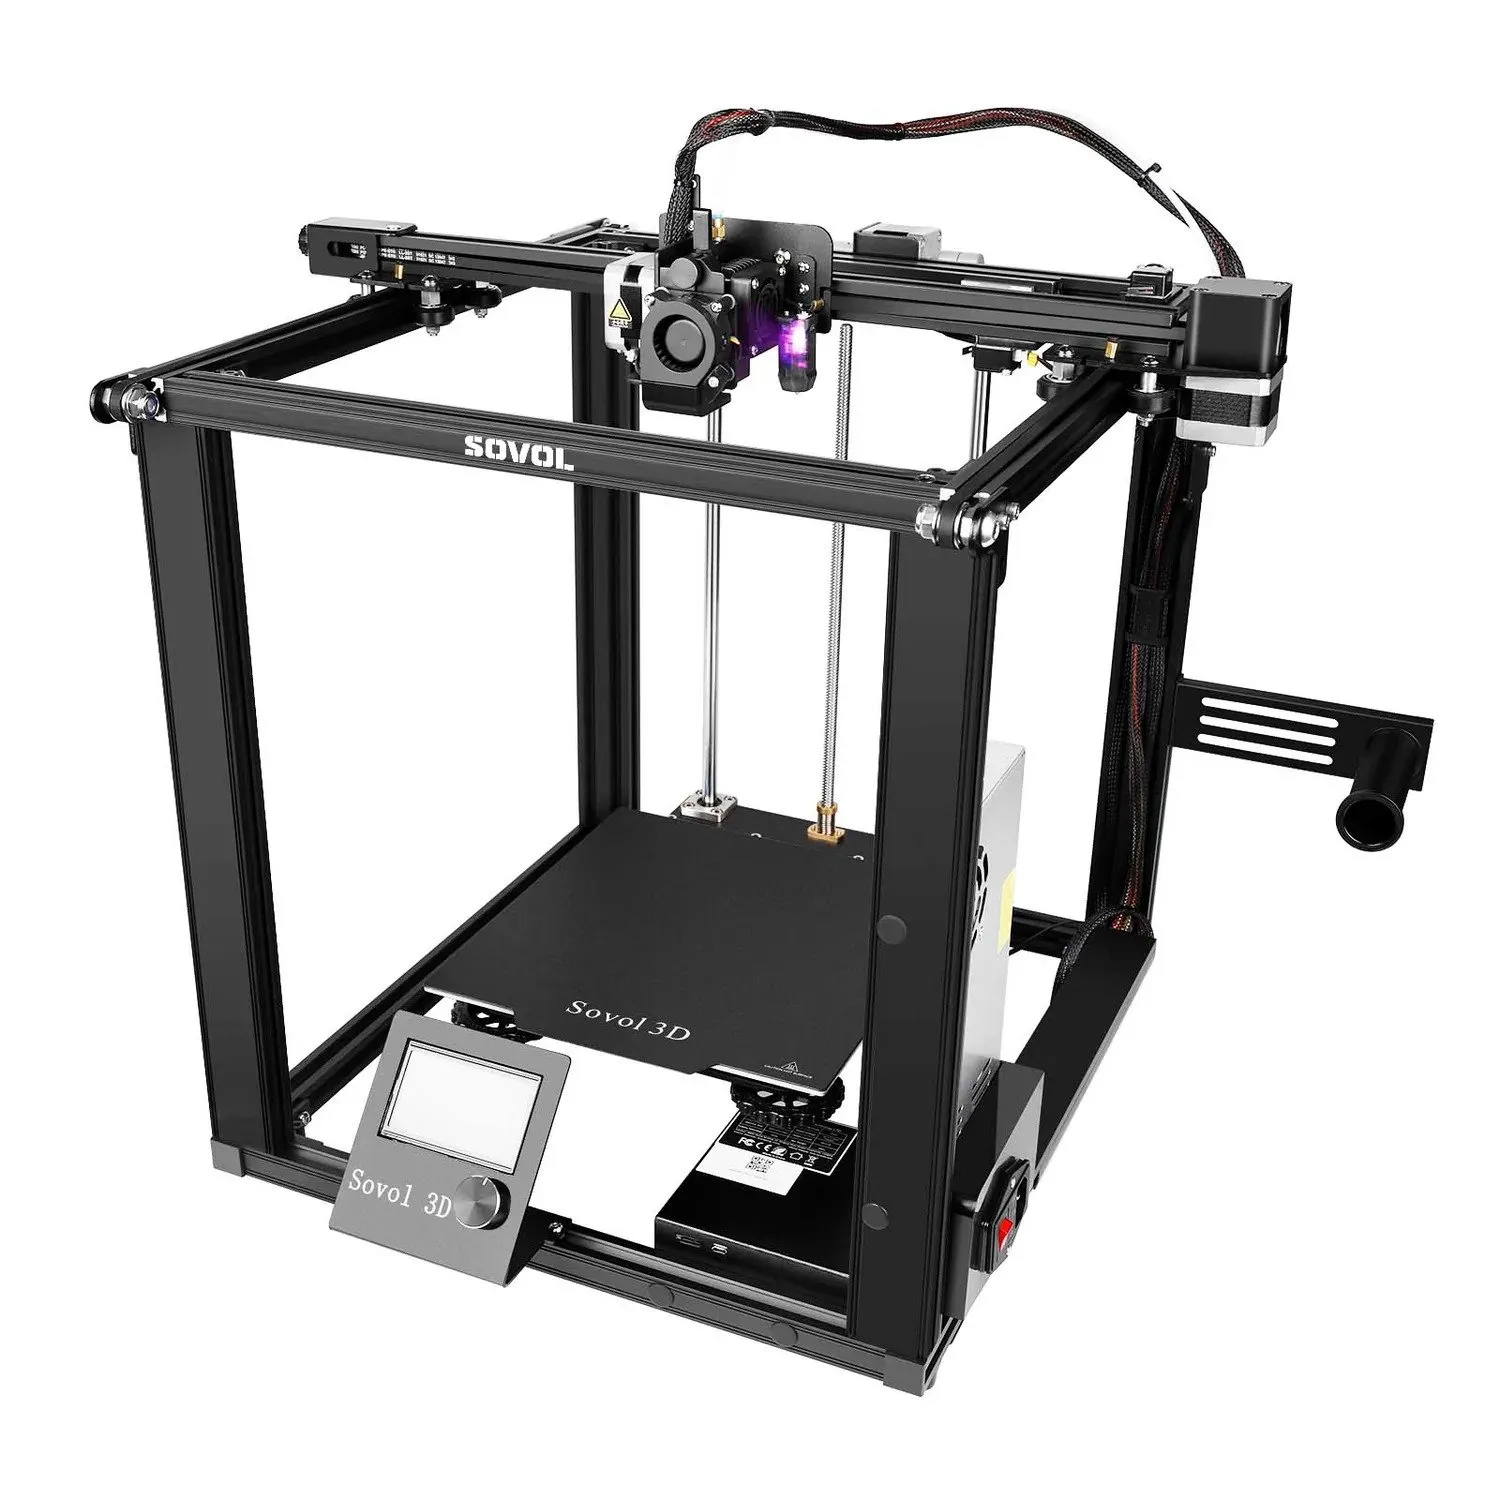 Creality Ender 5 S1 3D Printer Review: Merely Competent Among